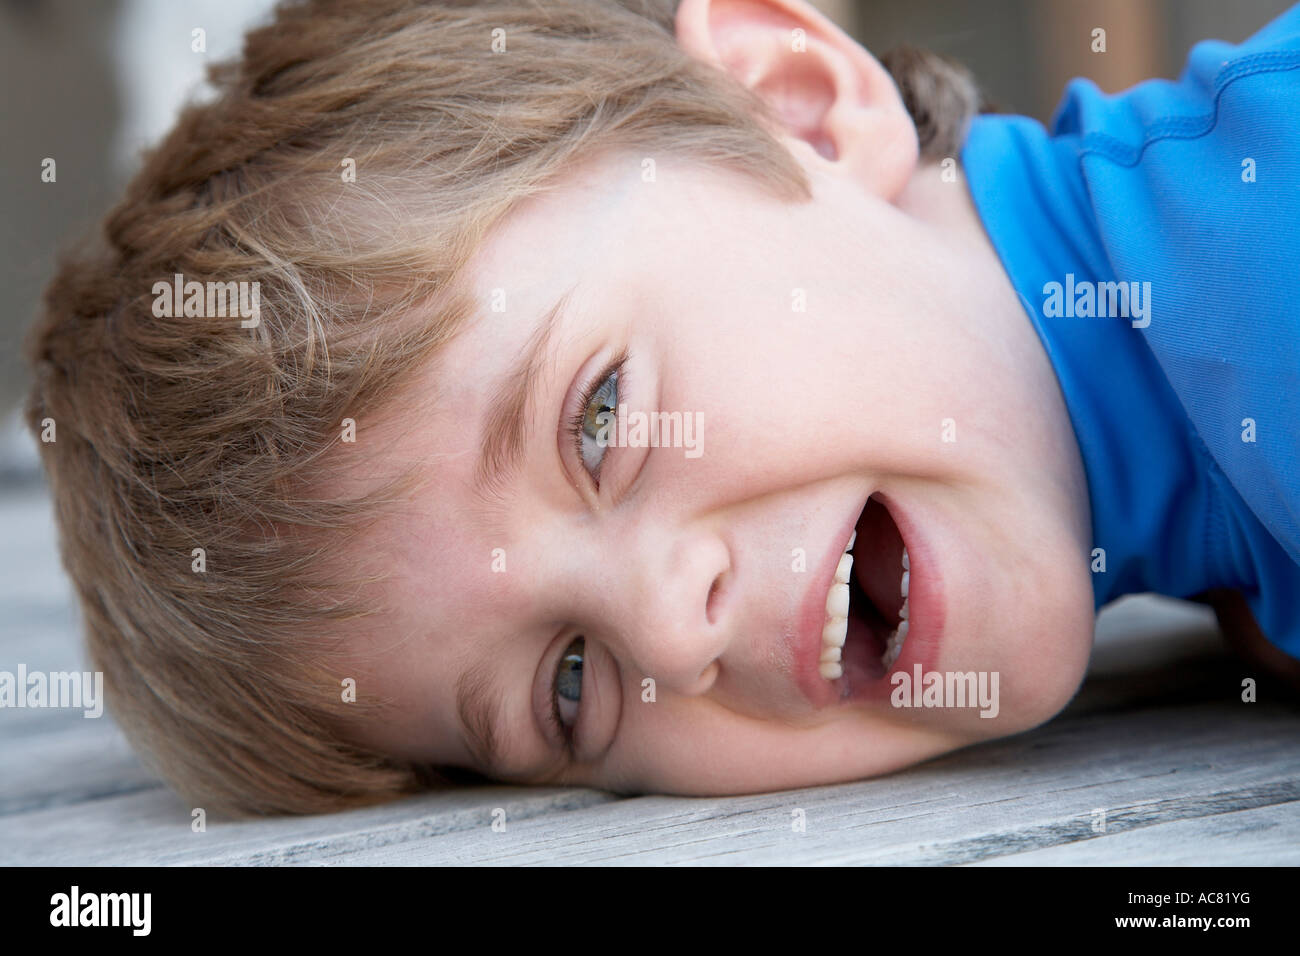 boy 7 laying on deck smiling Stock Photo